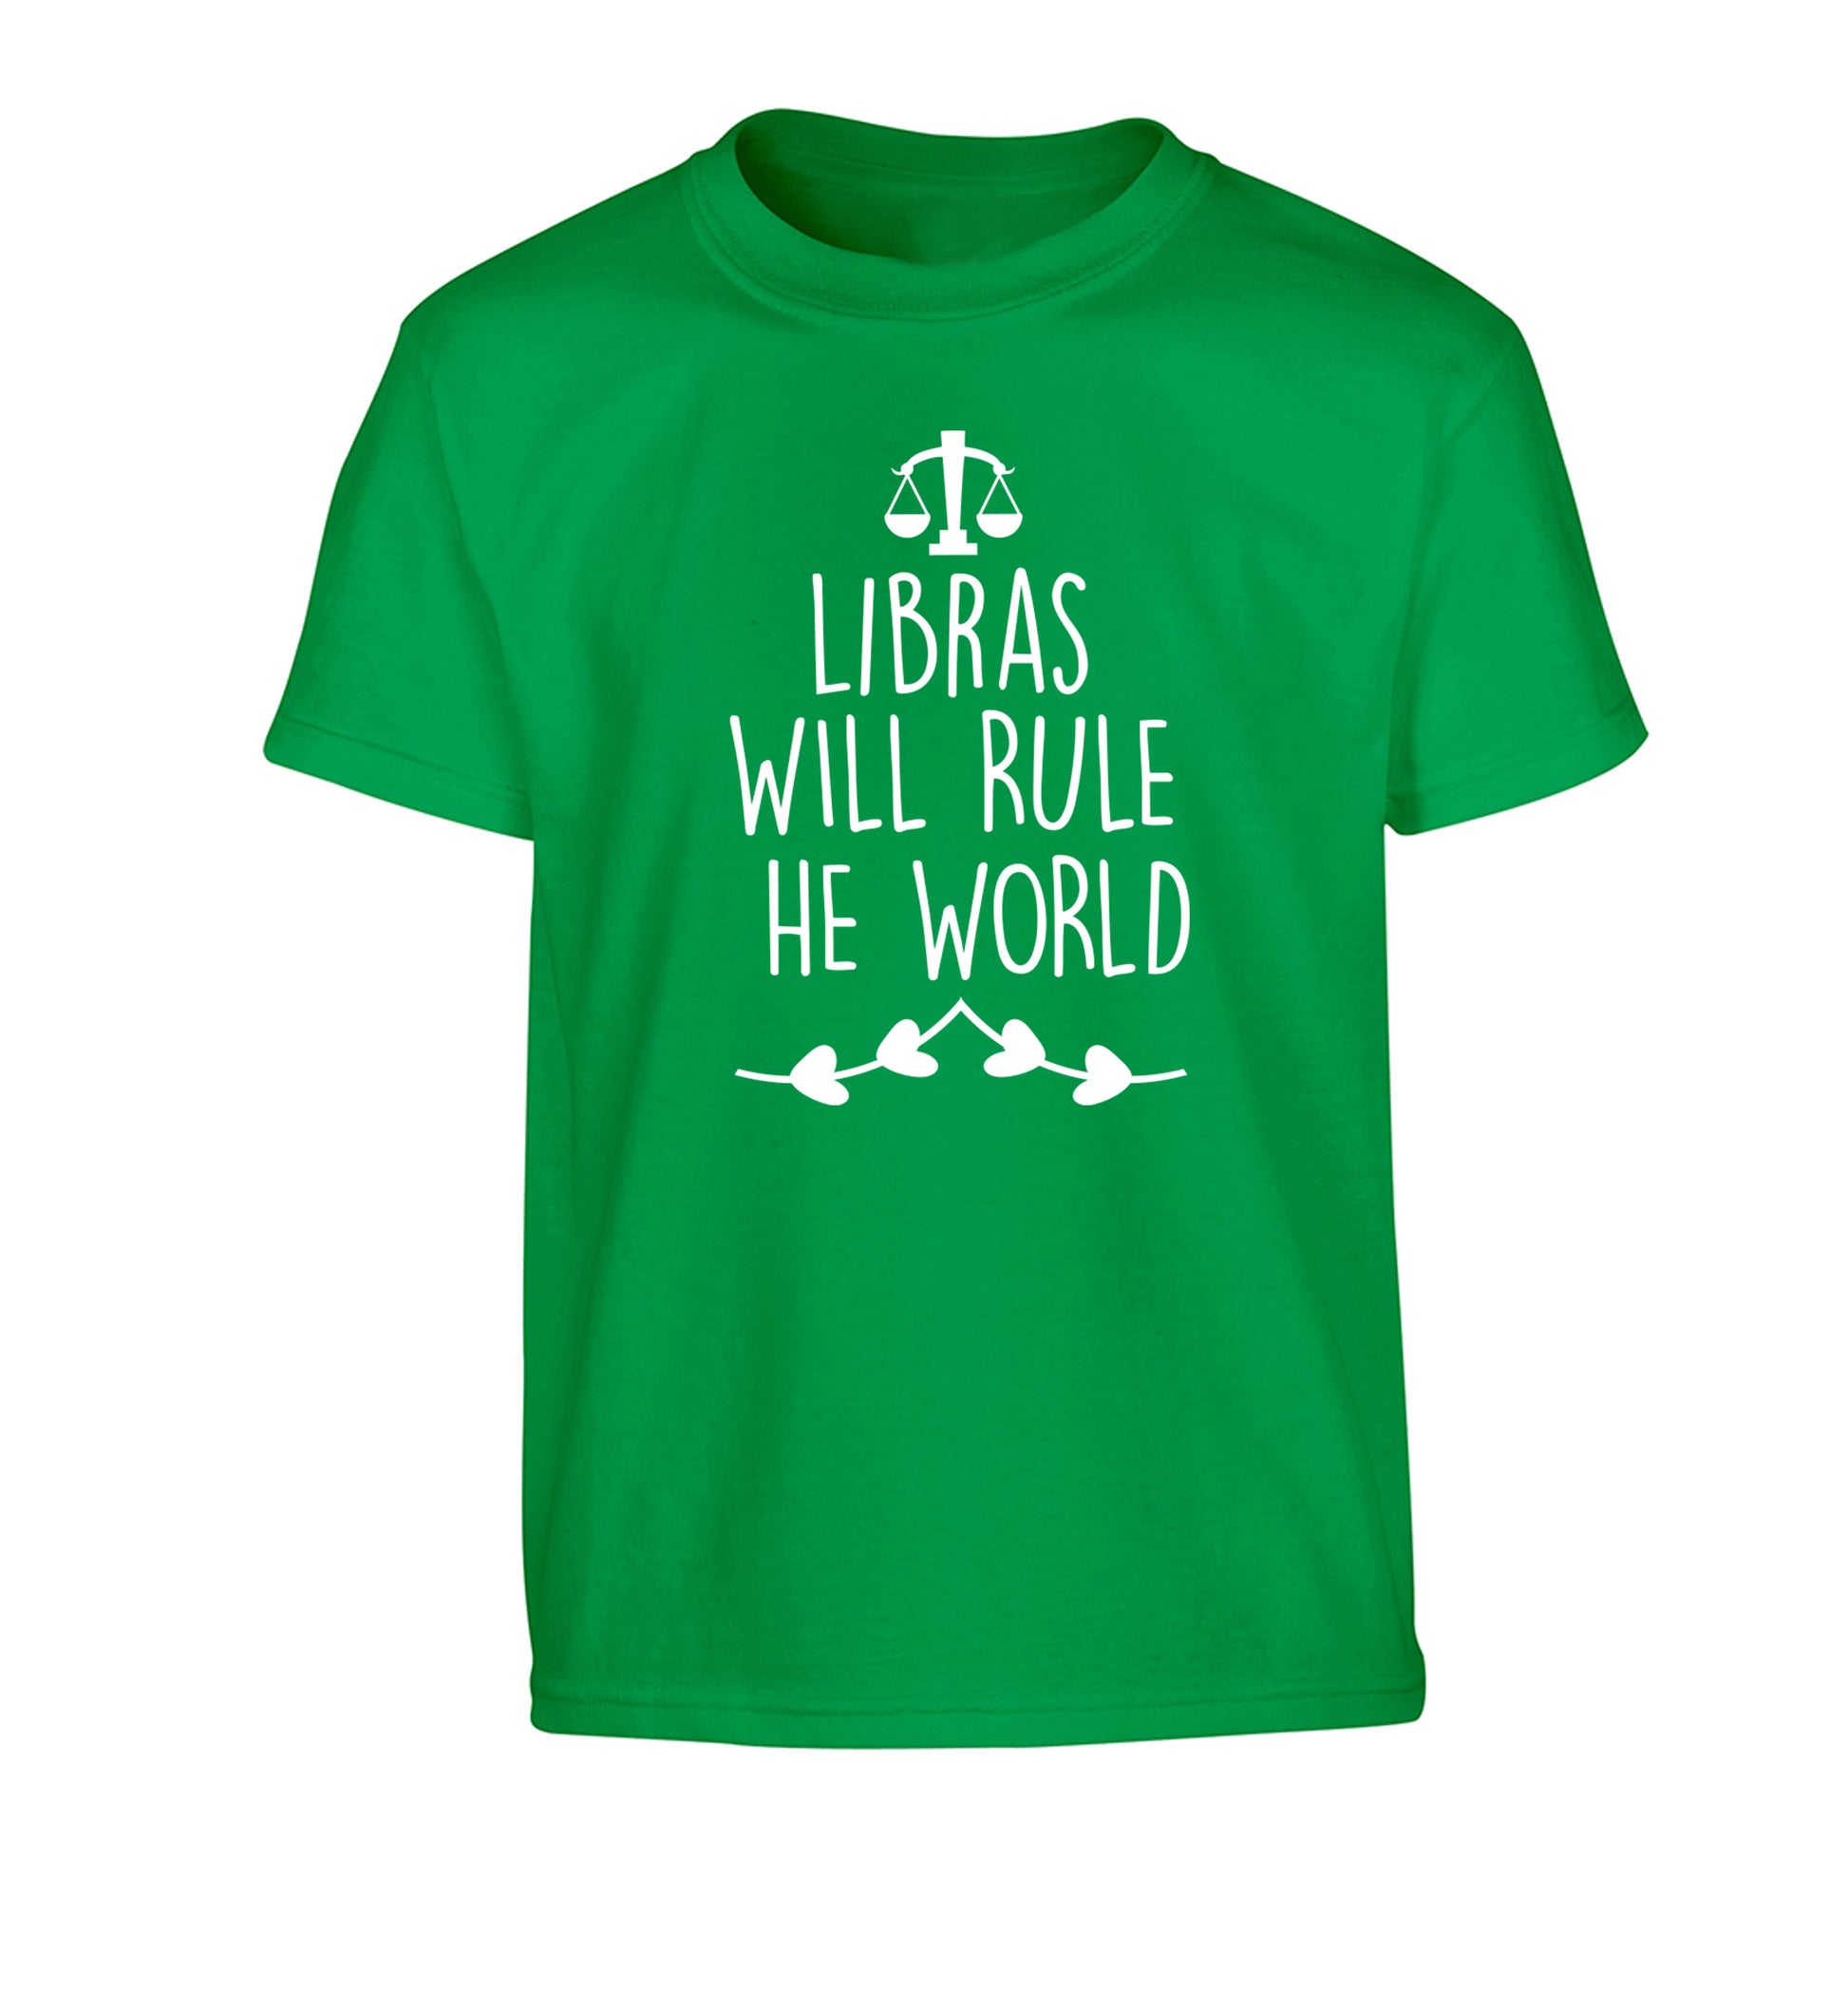 Libras will rule the world Children's green Tshirt 12-13 Years